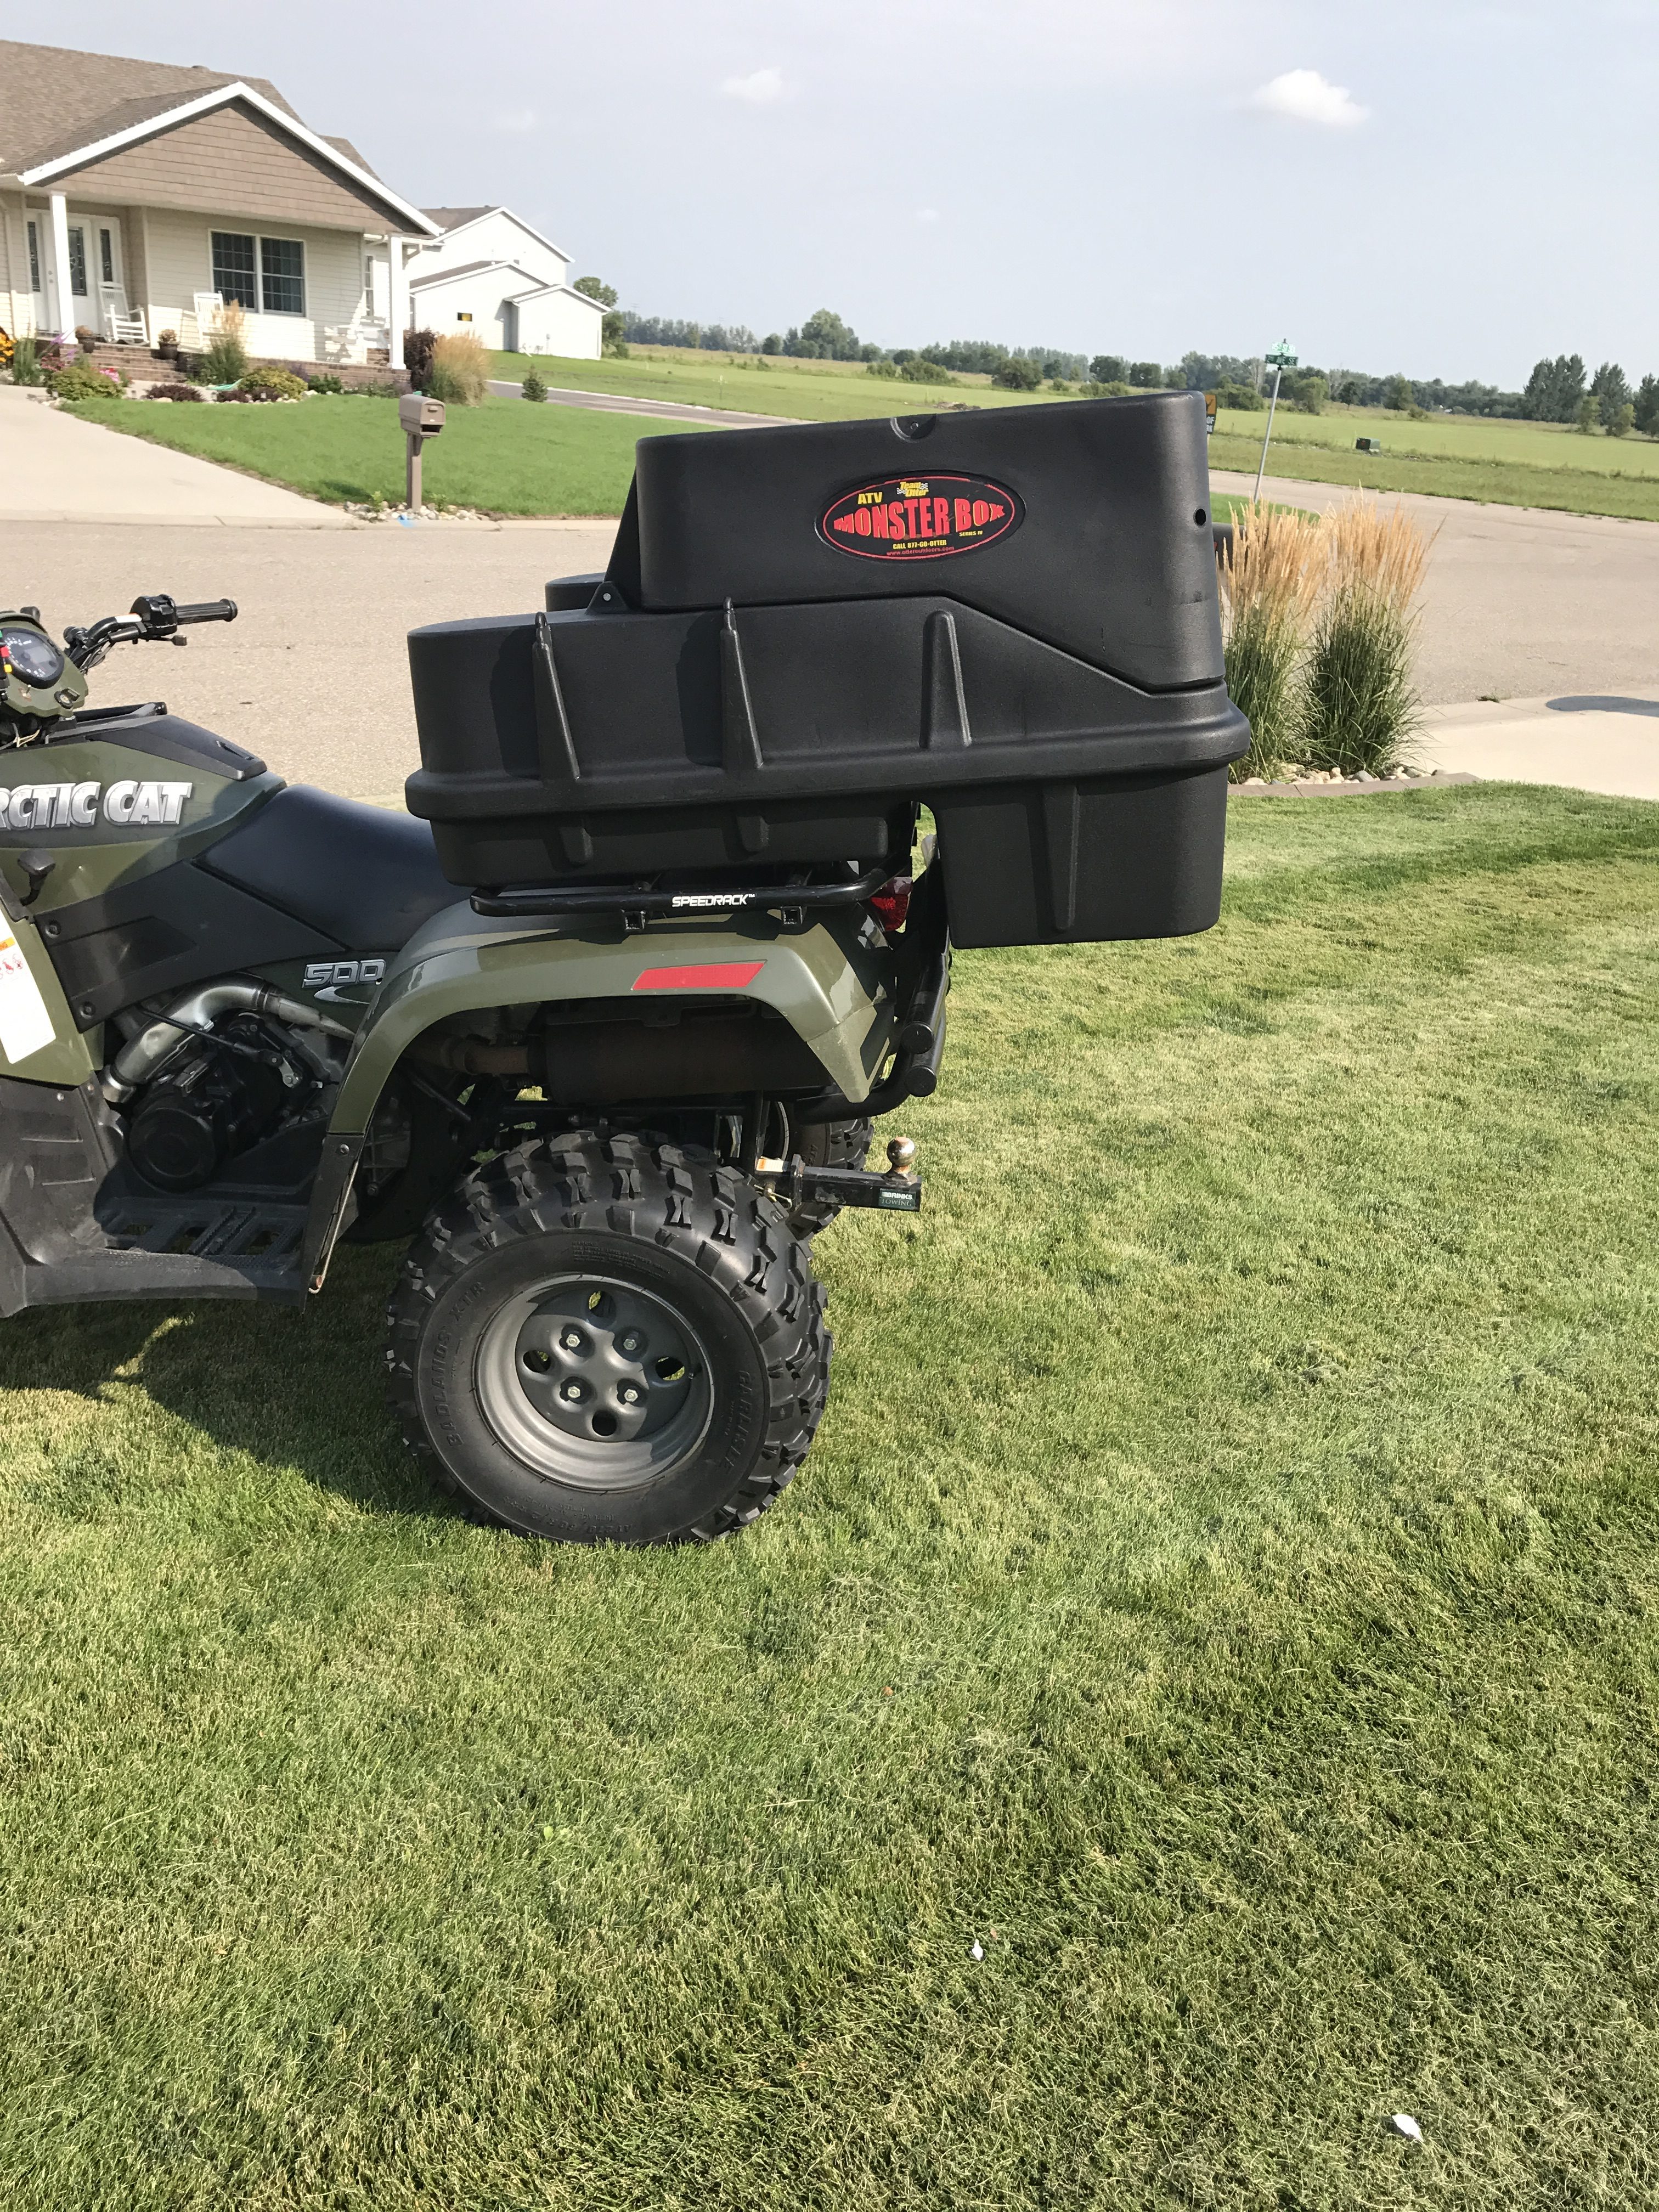 Otter ATV Monster Box – Large - Classified Ads - Classified Ads